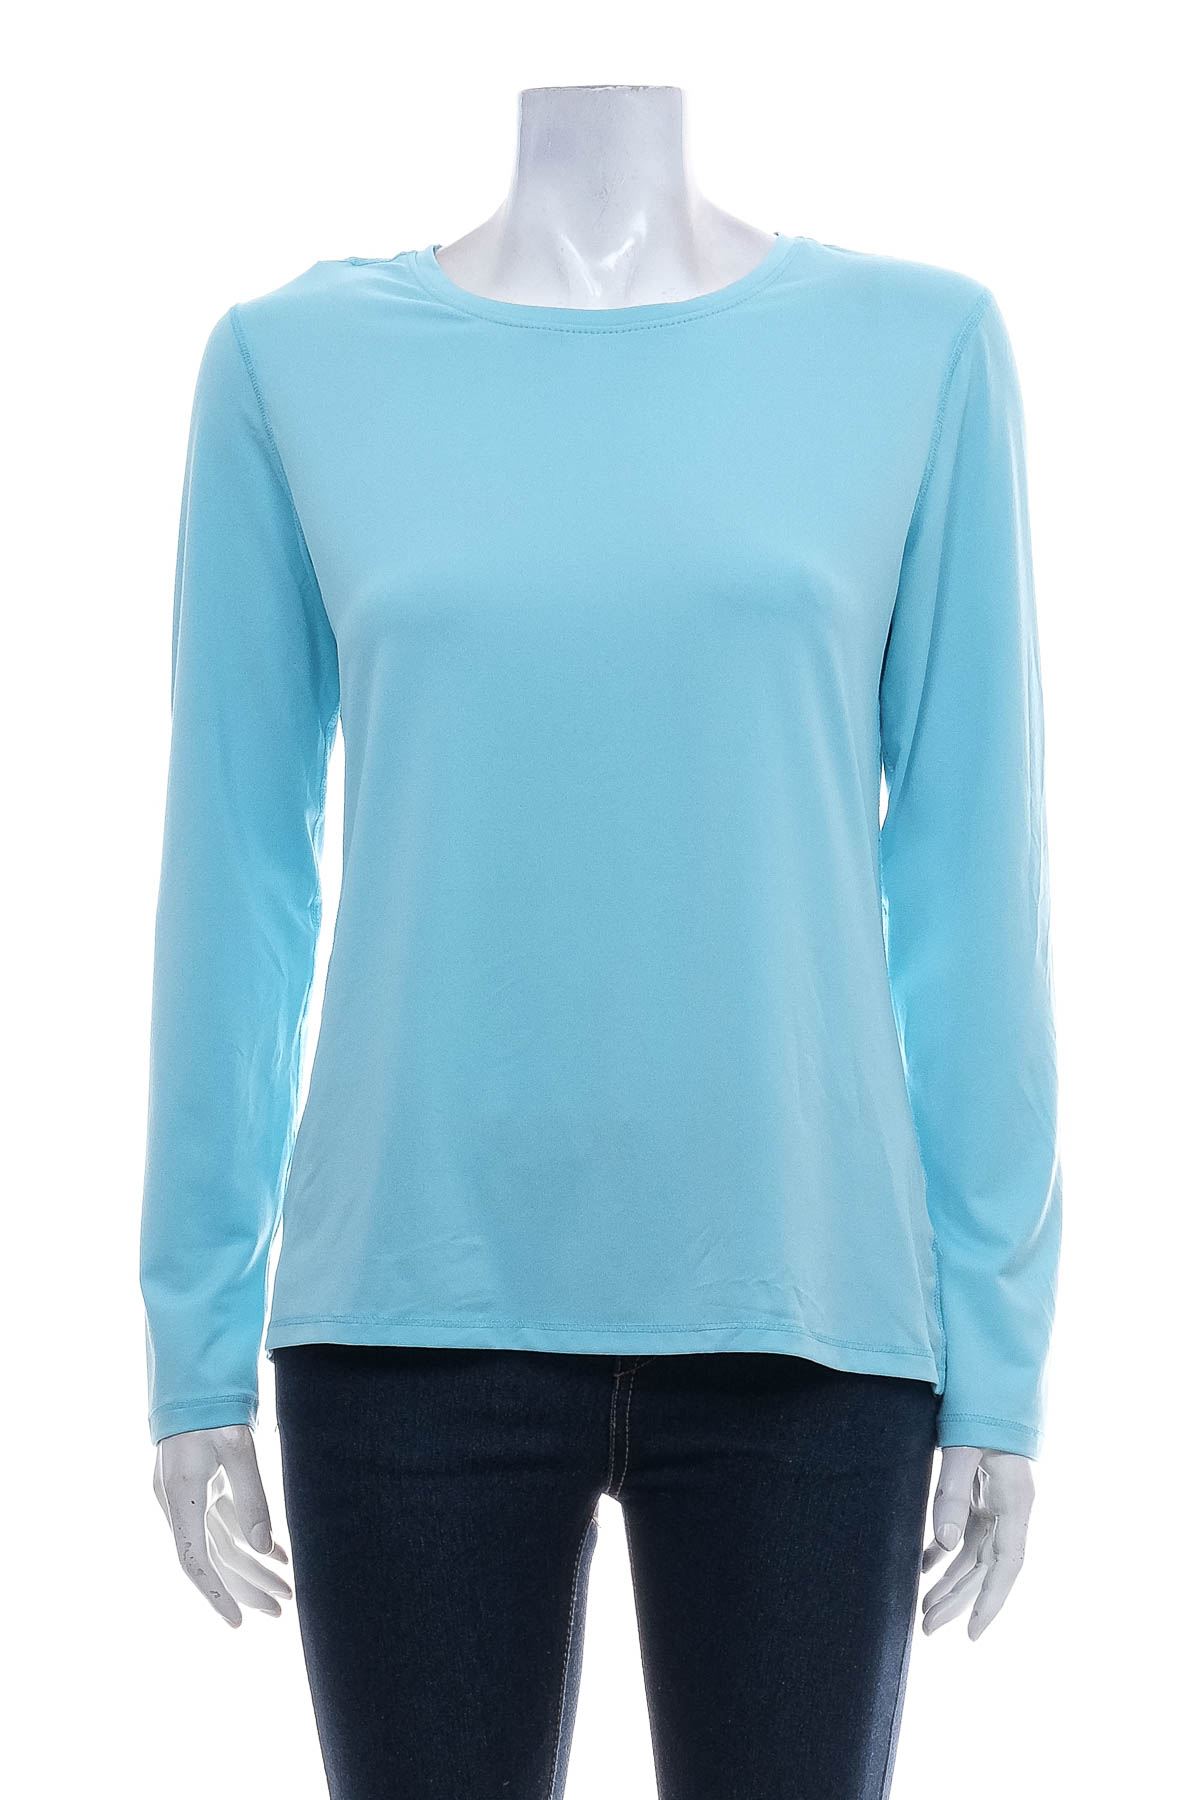 Women's blouse - Athletic Works - 0